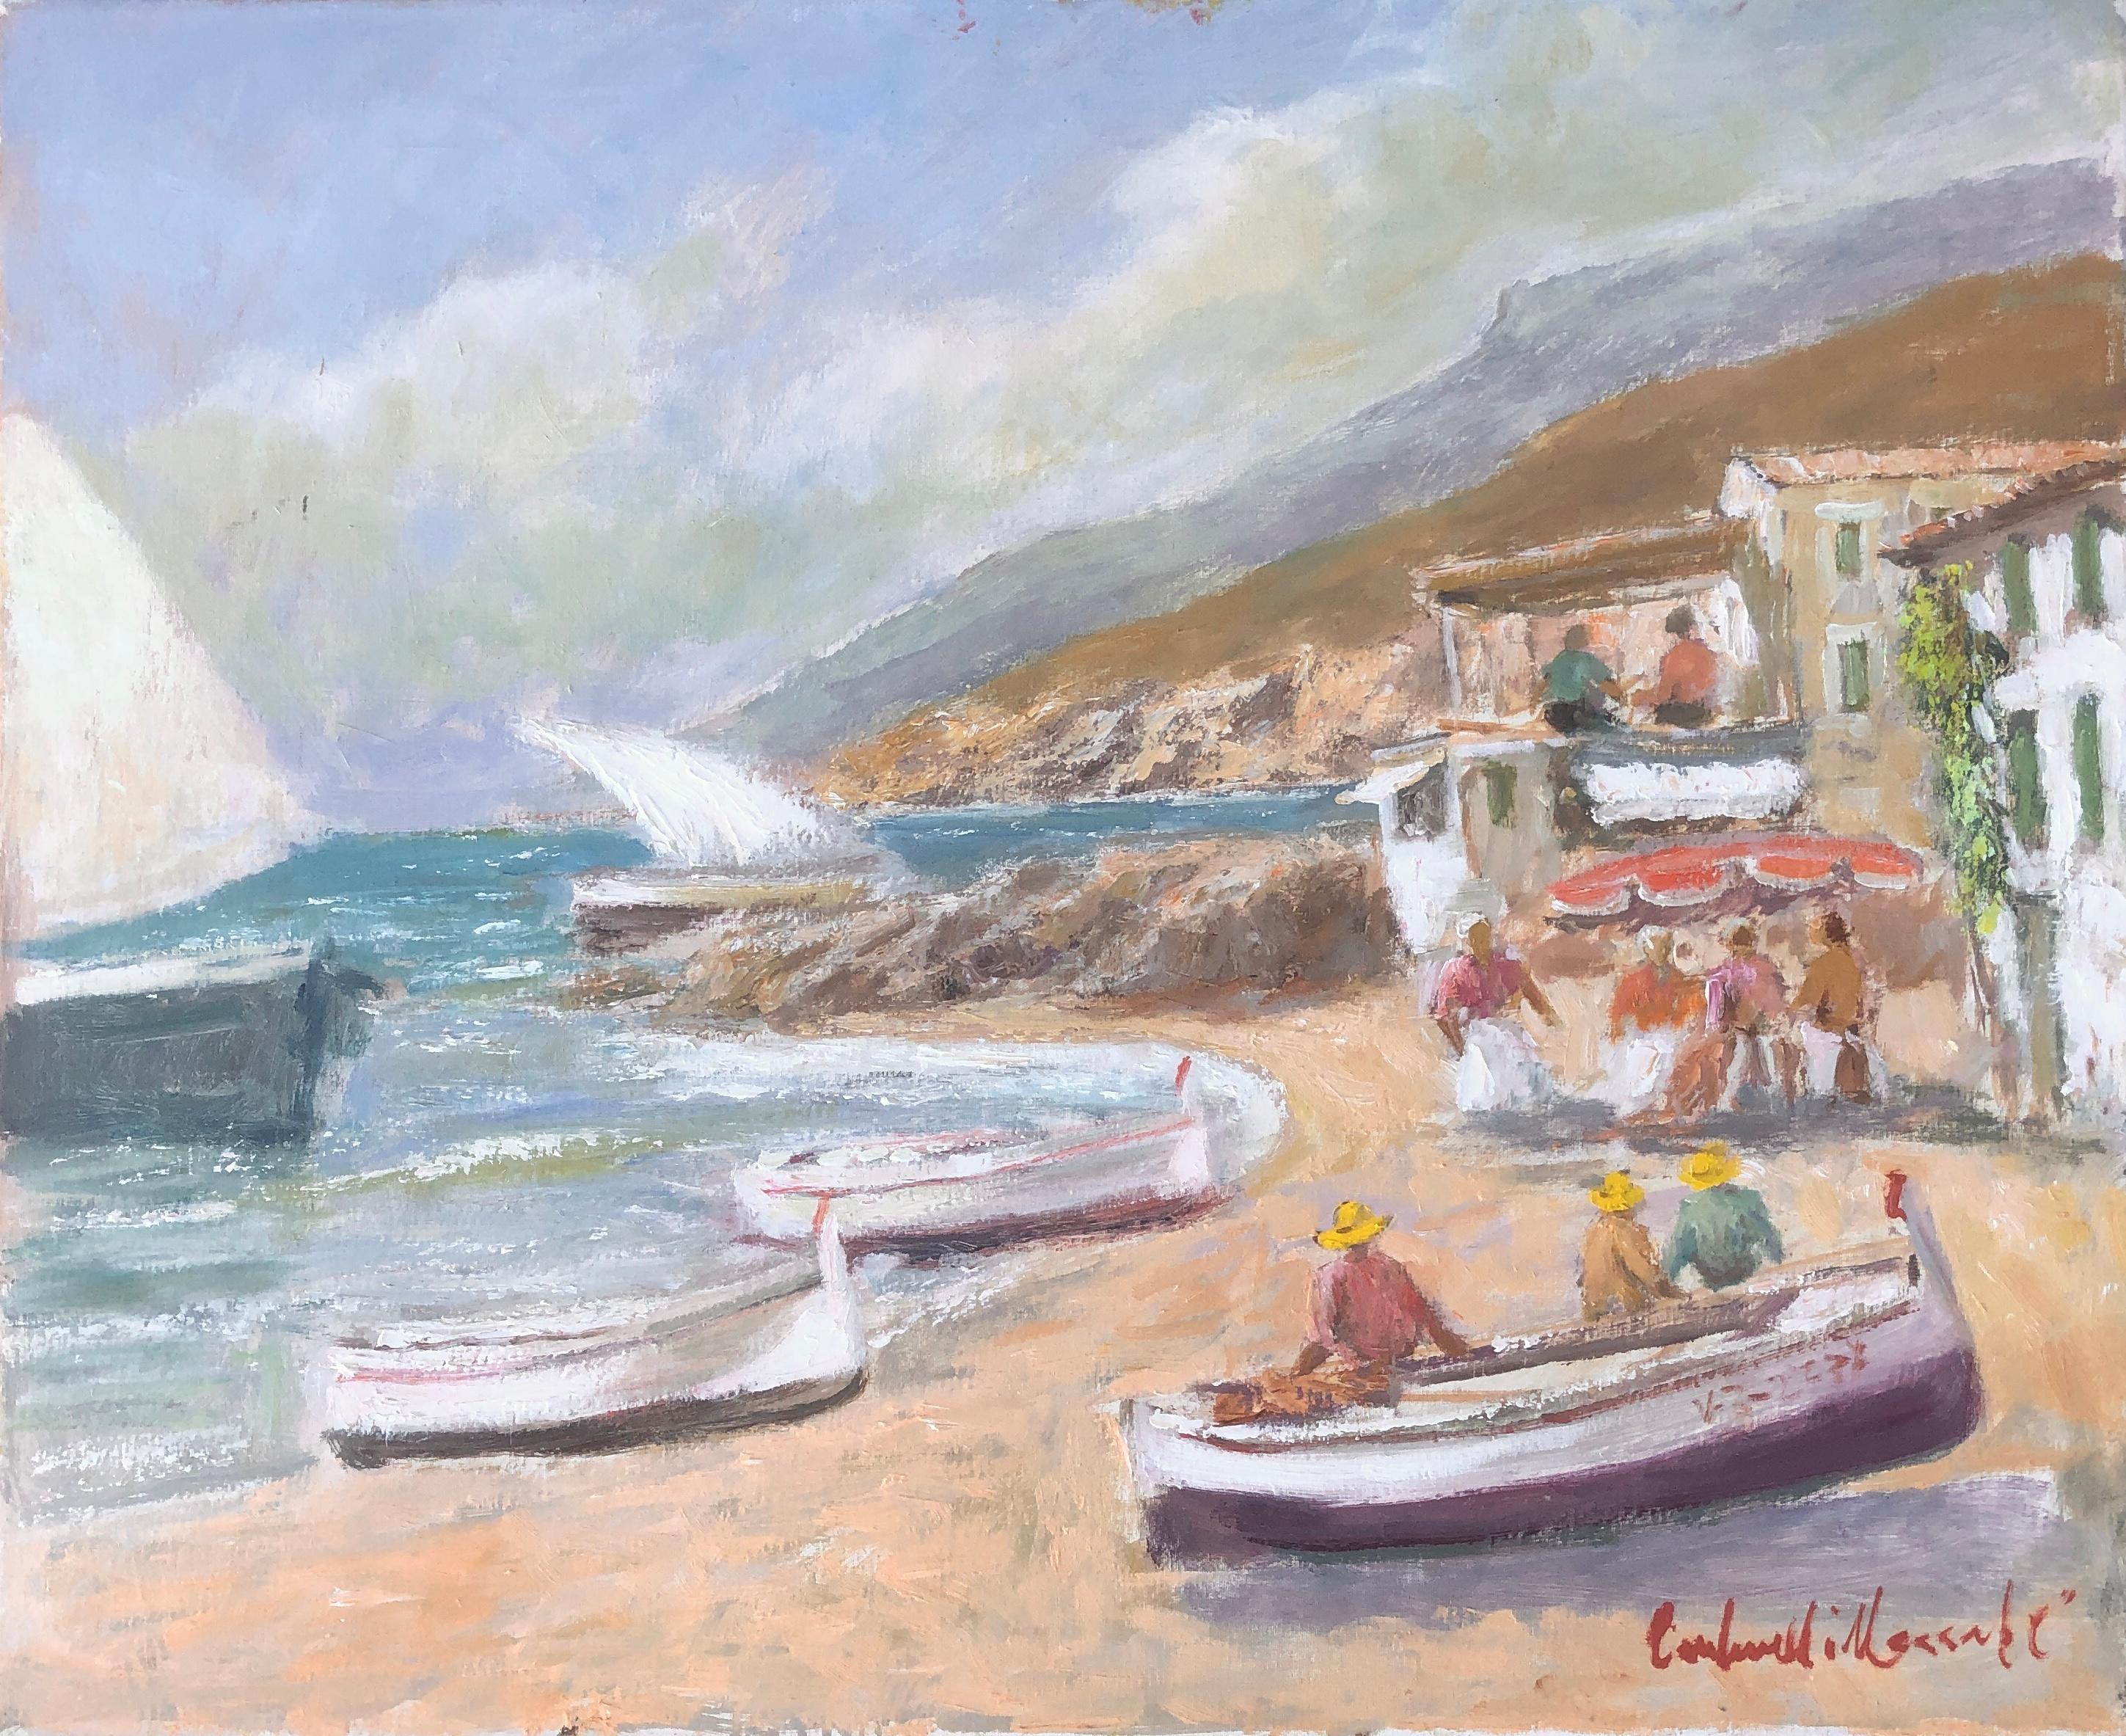 Francisco Carbonell Massabe Landscape Painting - menders on the beach Spain oil on canvas painting spanish seascape